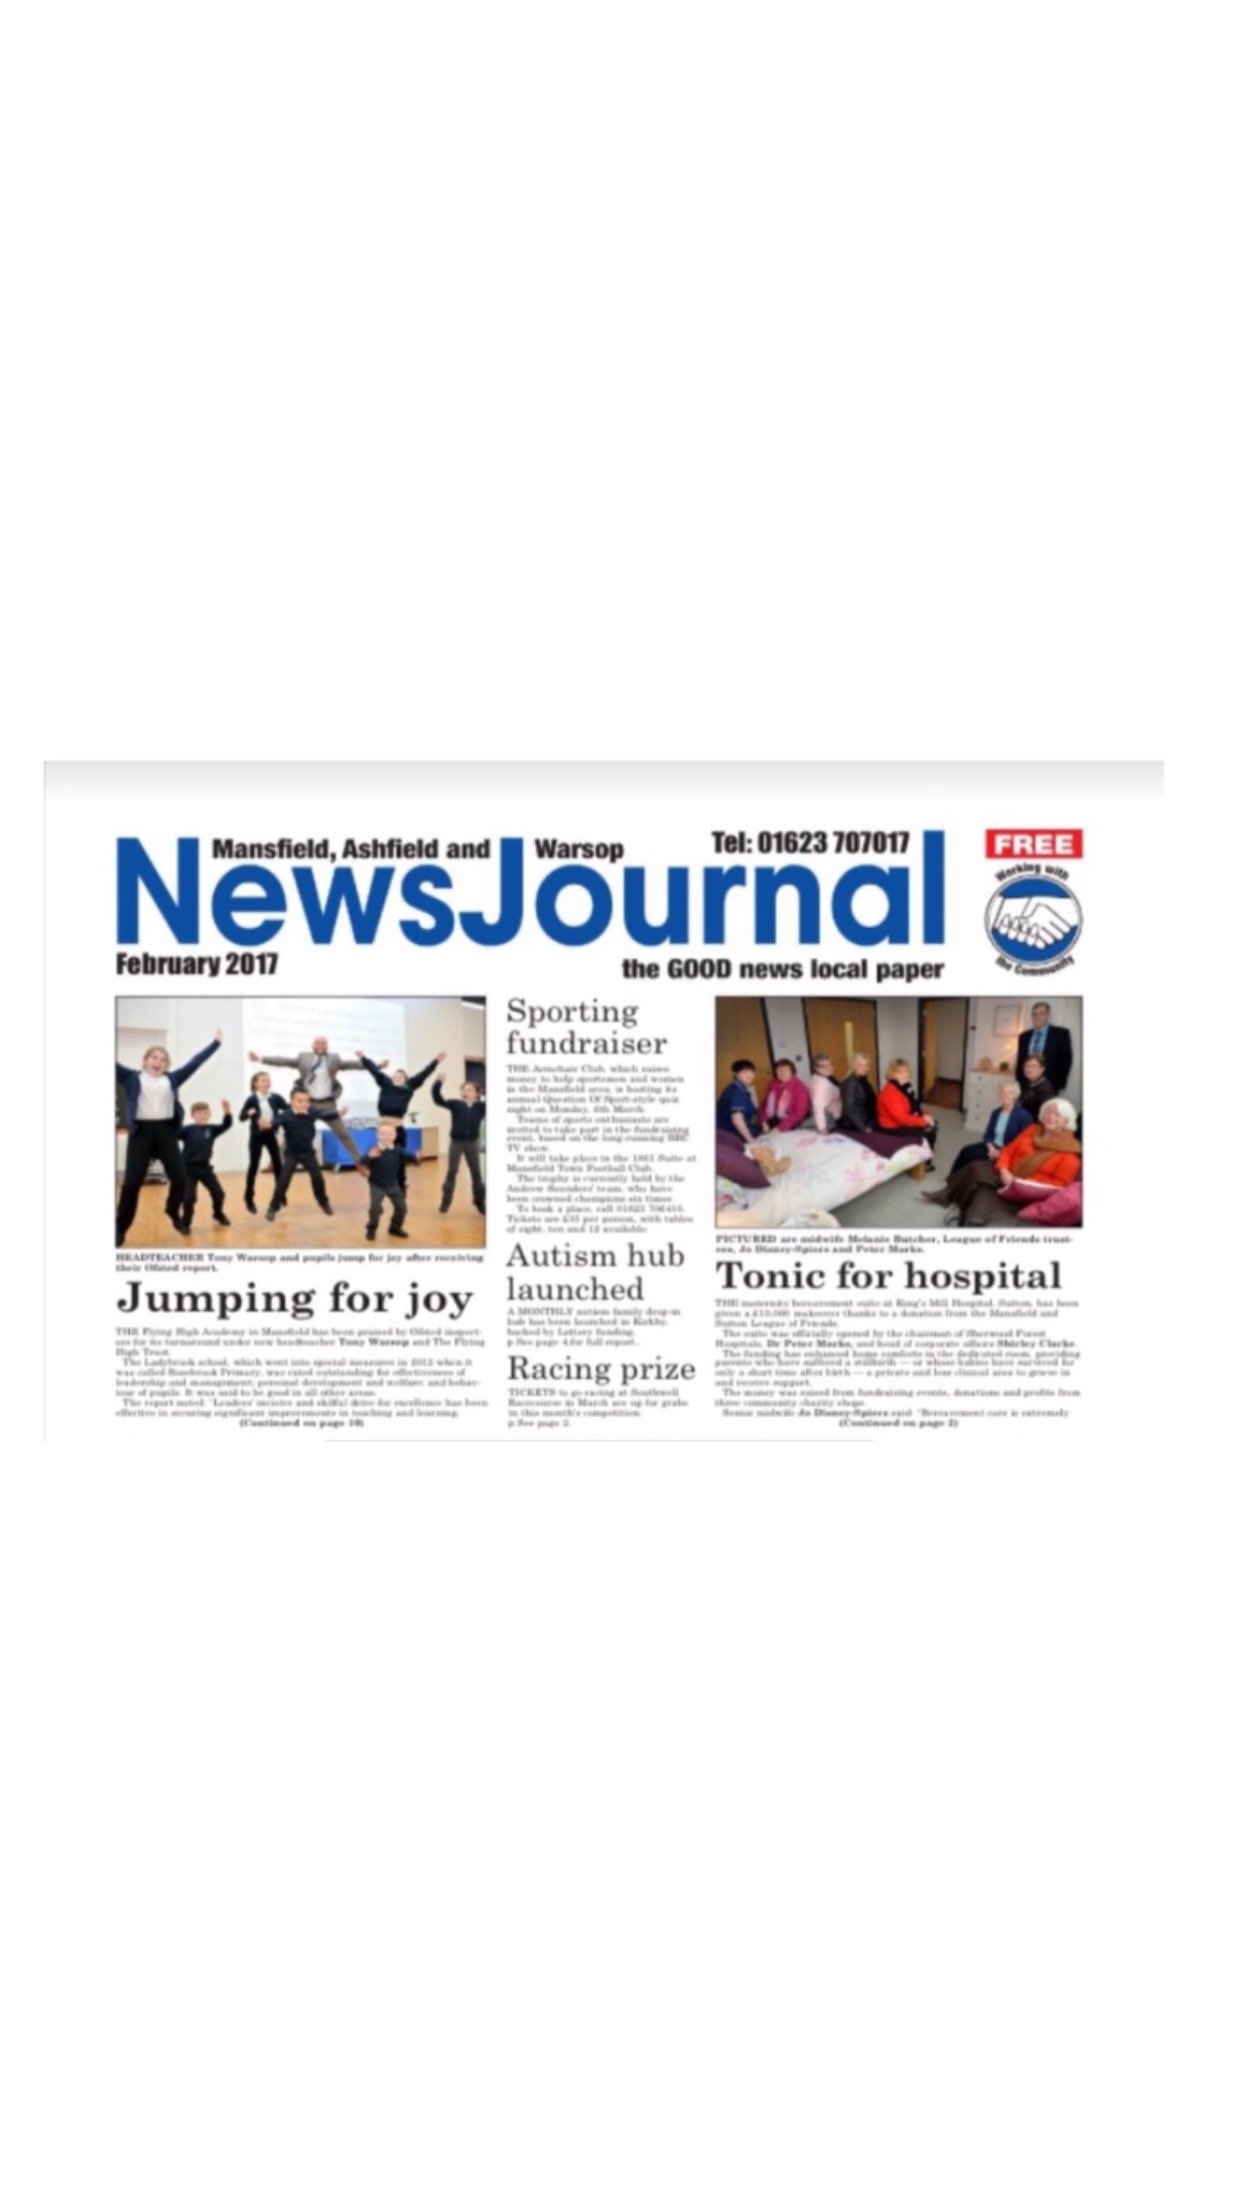 The UKs Only 'GOOD NEWS' Newspapers.
Mansfield & Ashfield News Journal -
Local News Journal - The Sherwood.
FREE Newspapers covering positive local news.